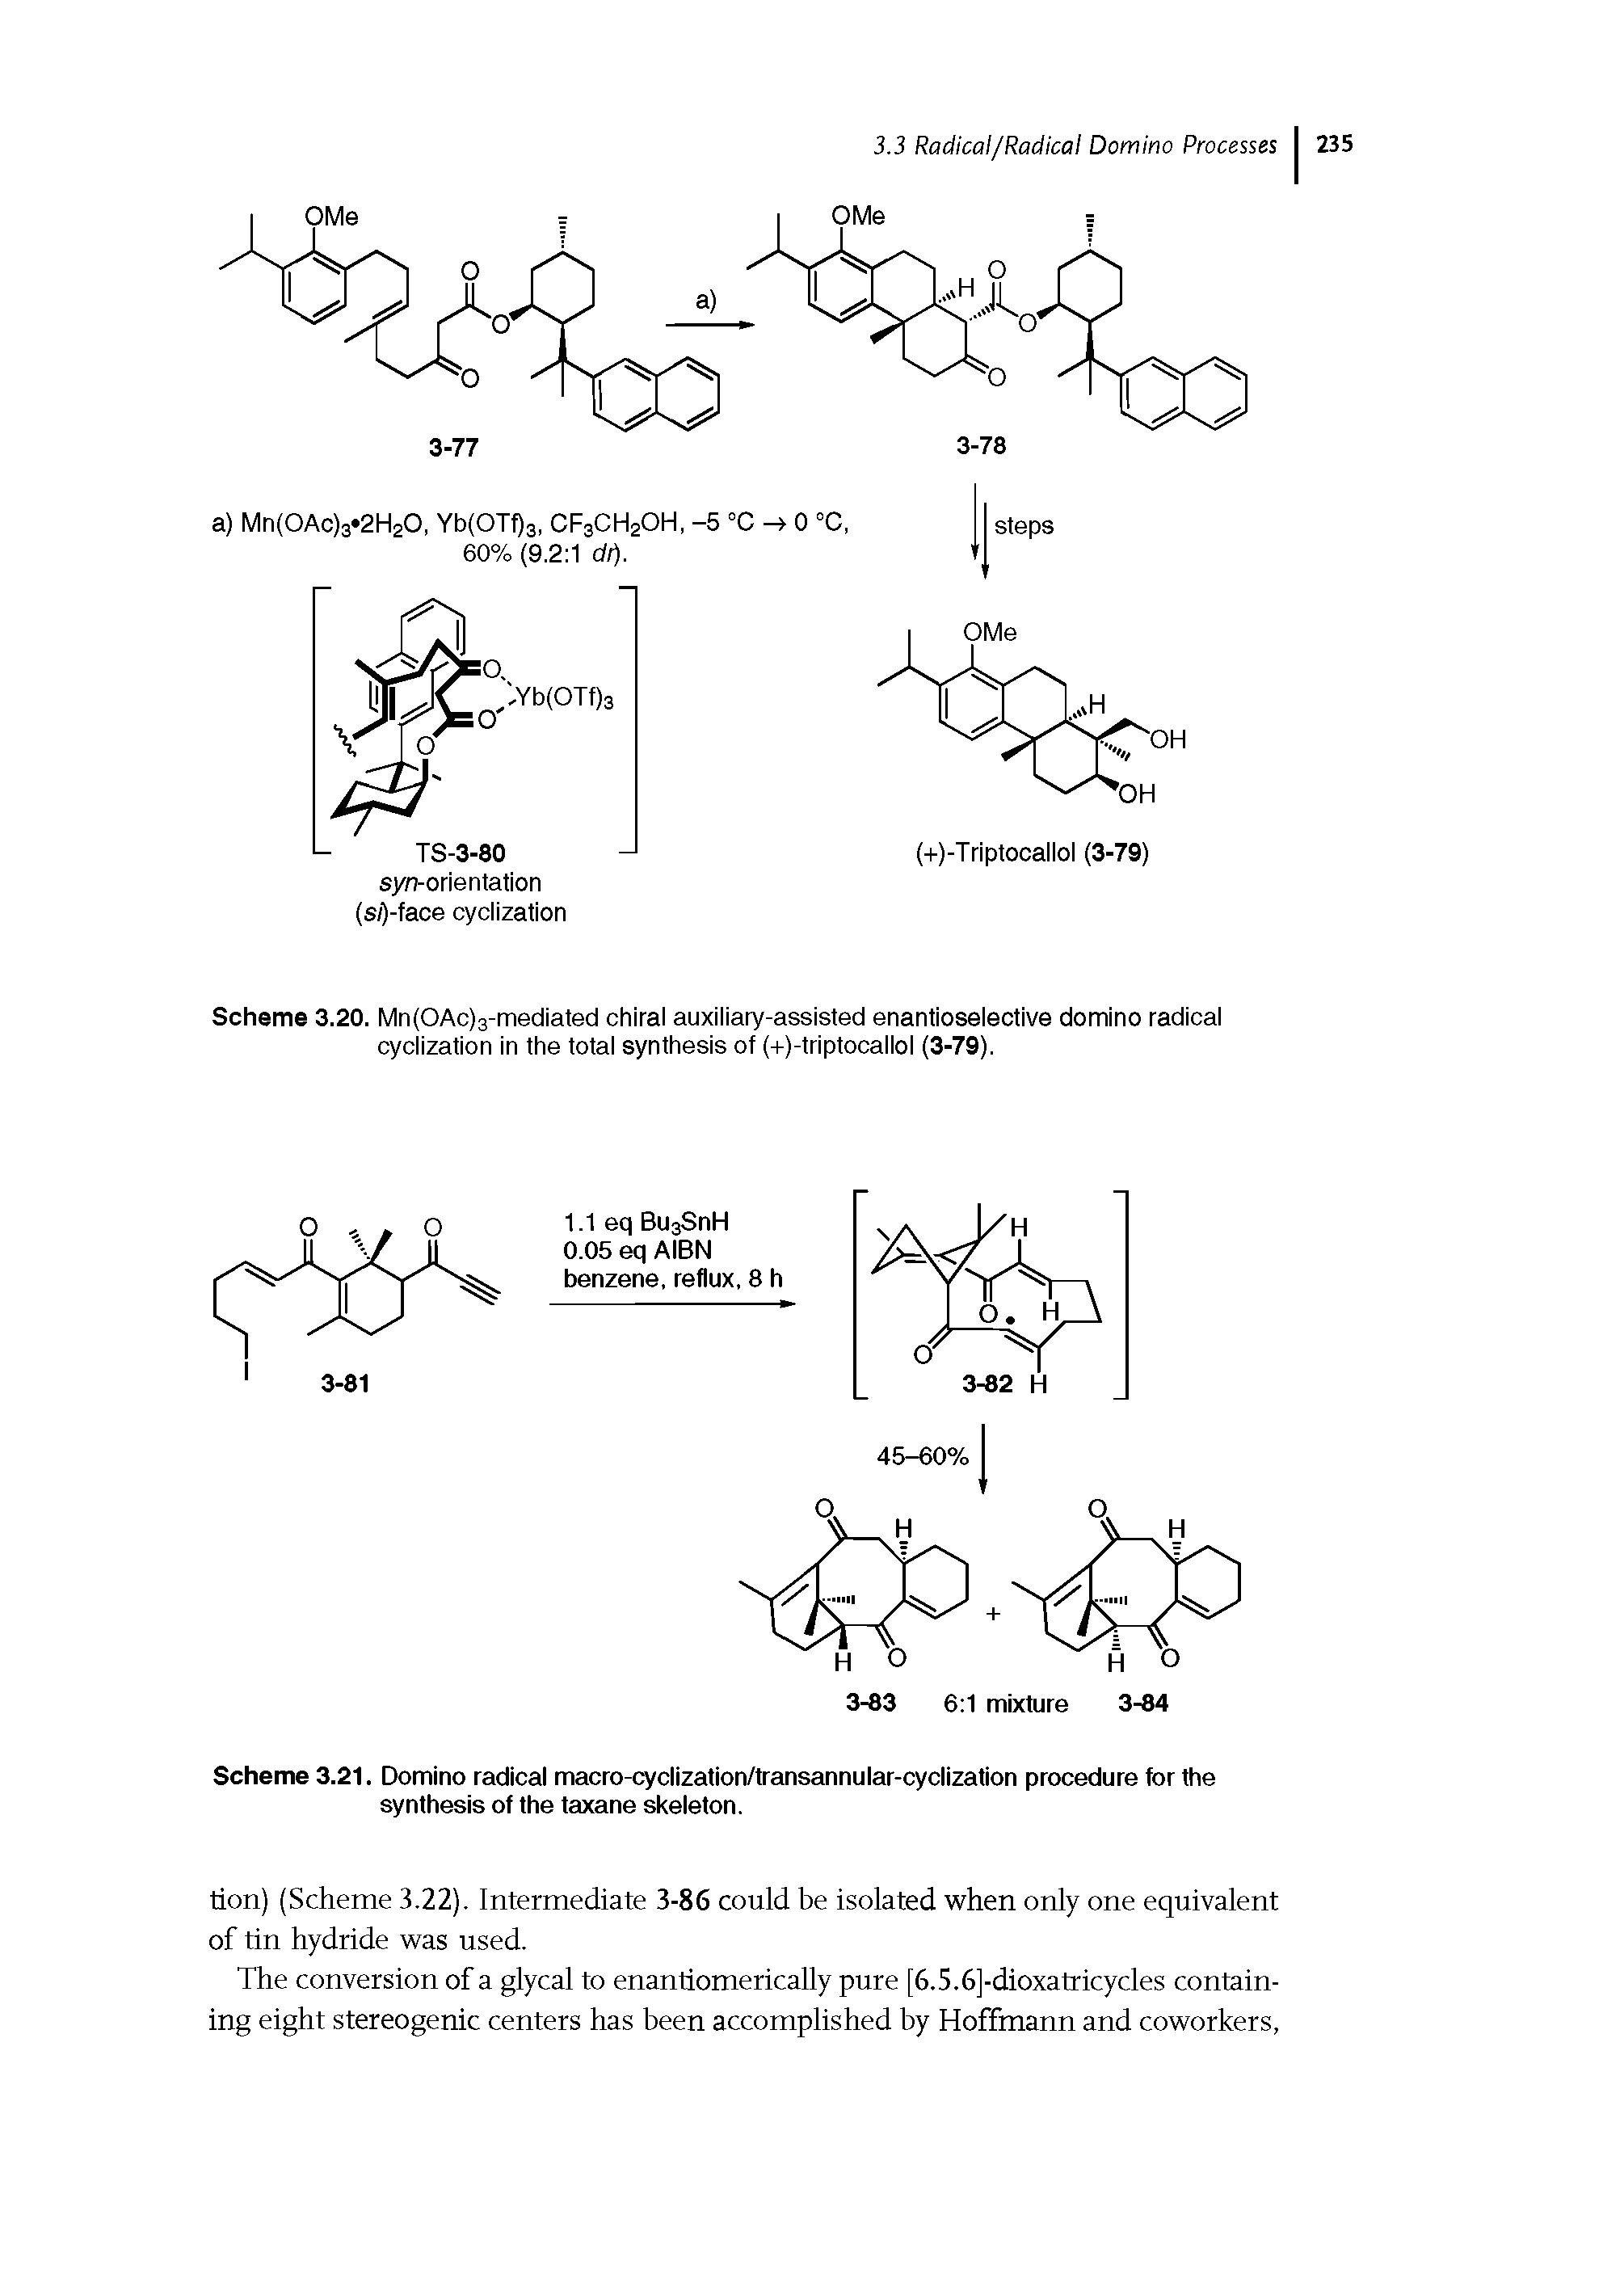 Scheme 3.21. Domino radical macro-cyclization/transannular-cyclization procedure for the synthesis of the taxane skeleton.